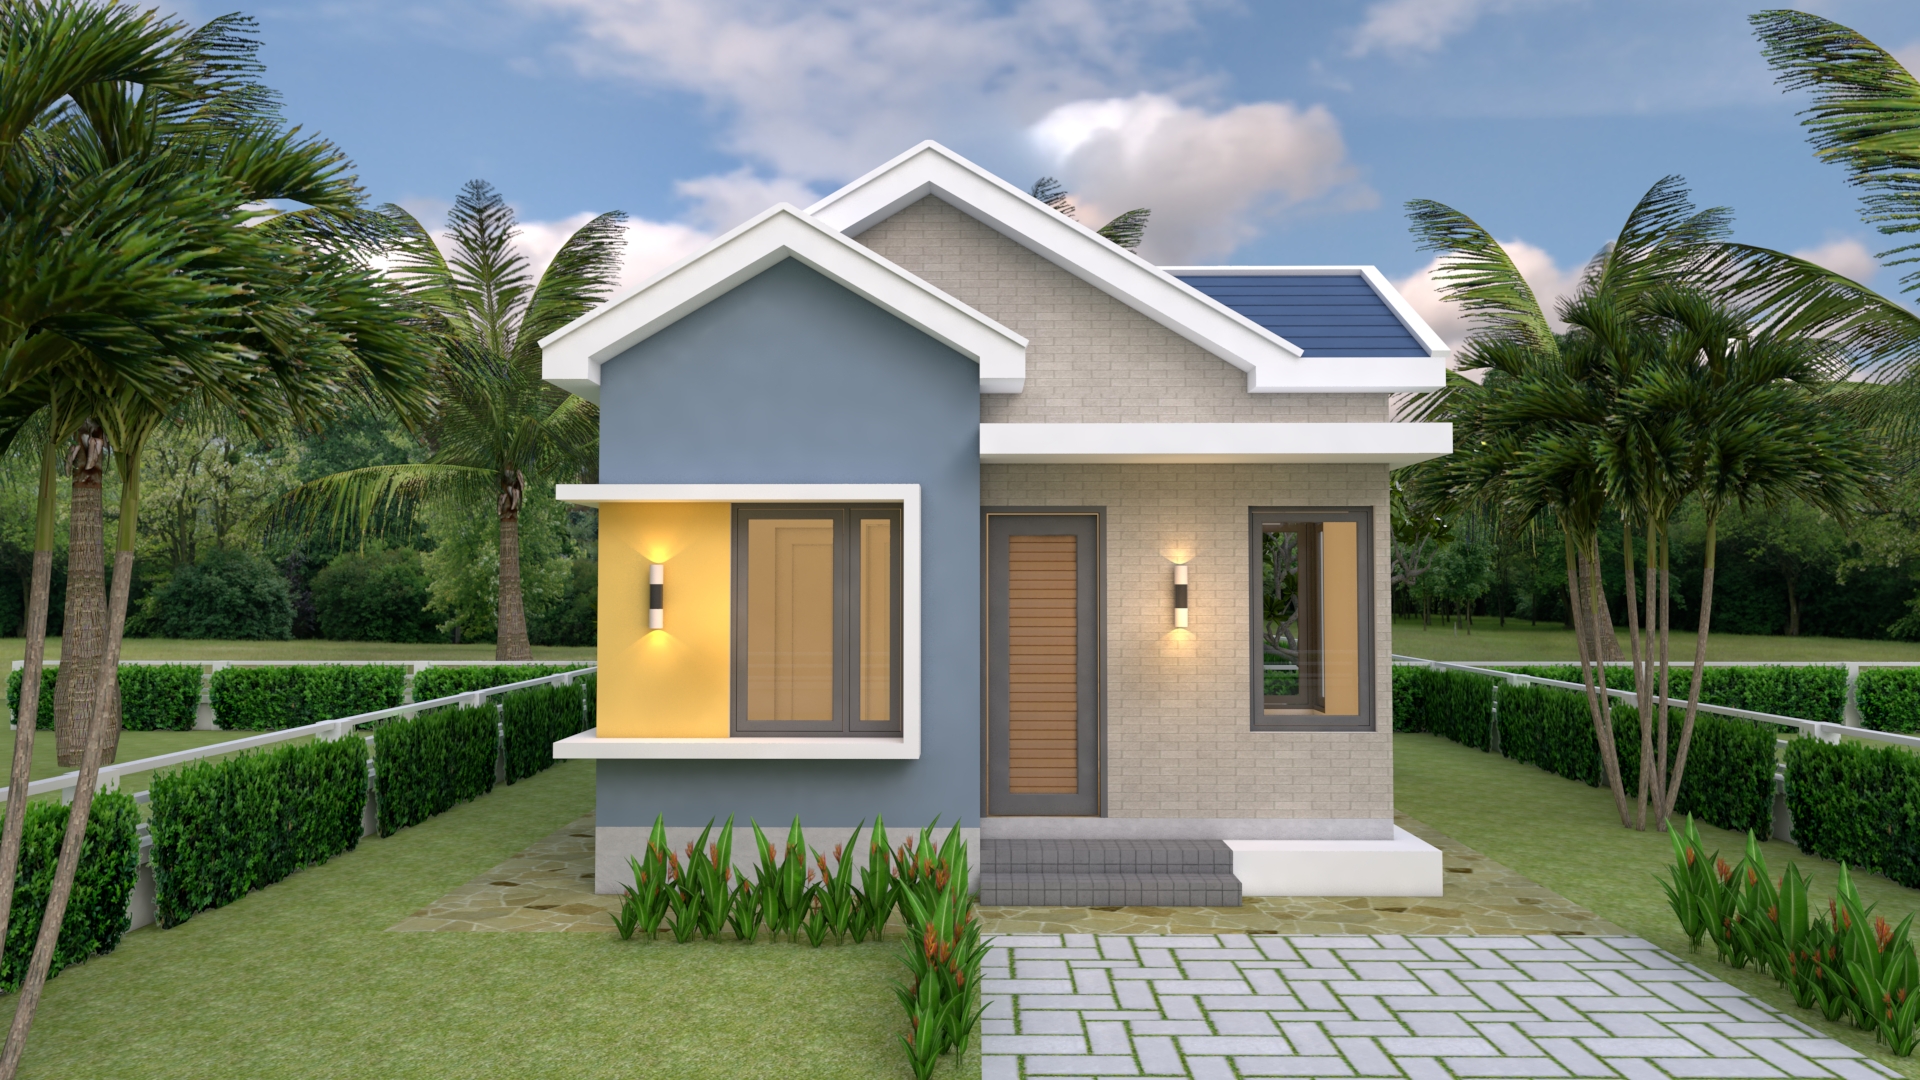 House design Plans 5.5x6.5 with One Bedroom Gable roof